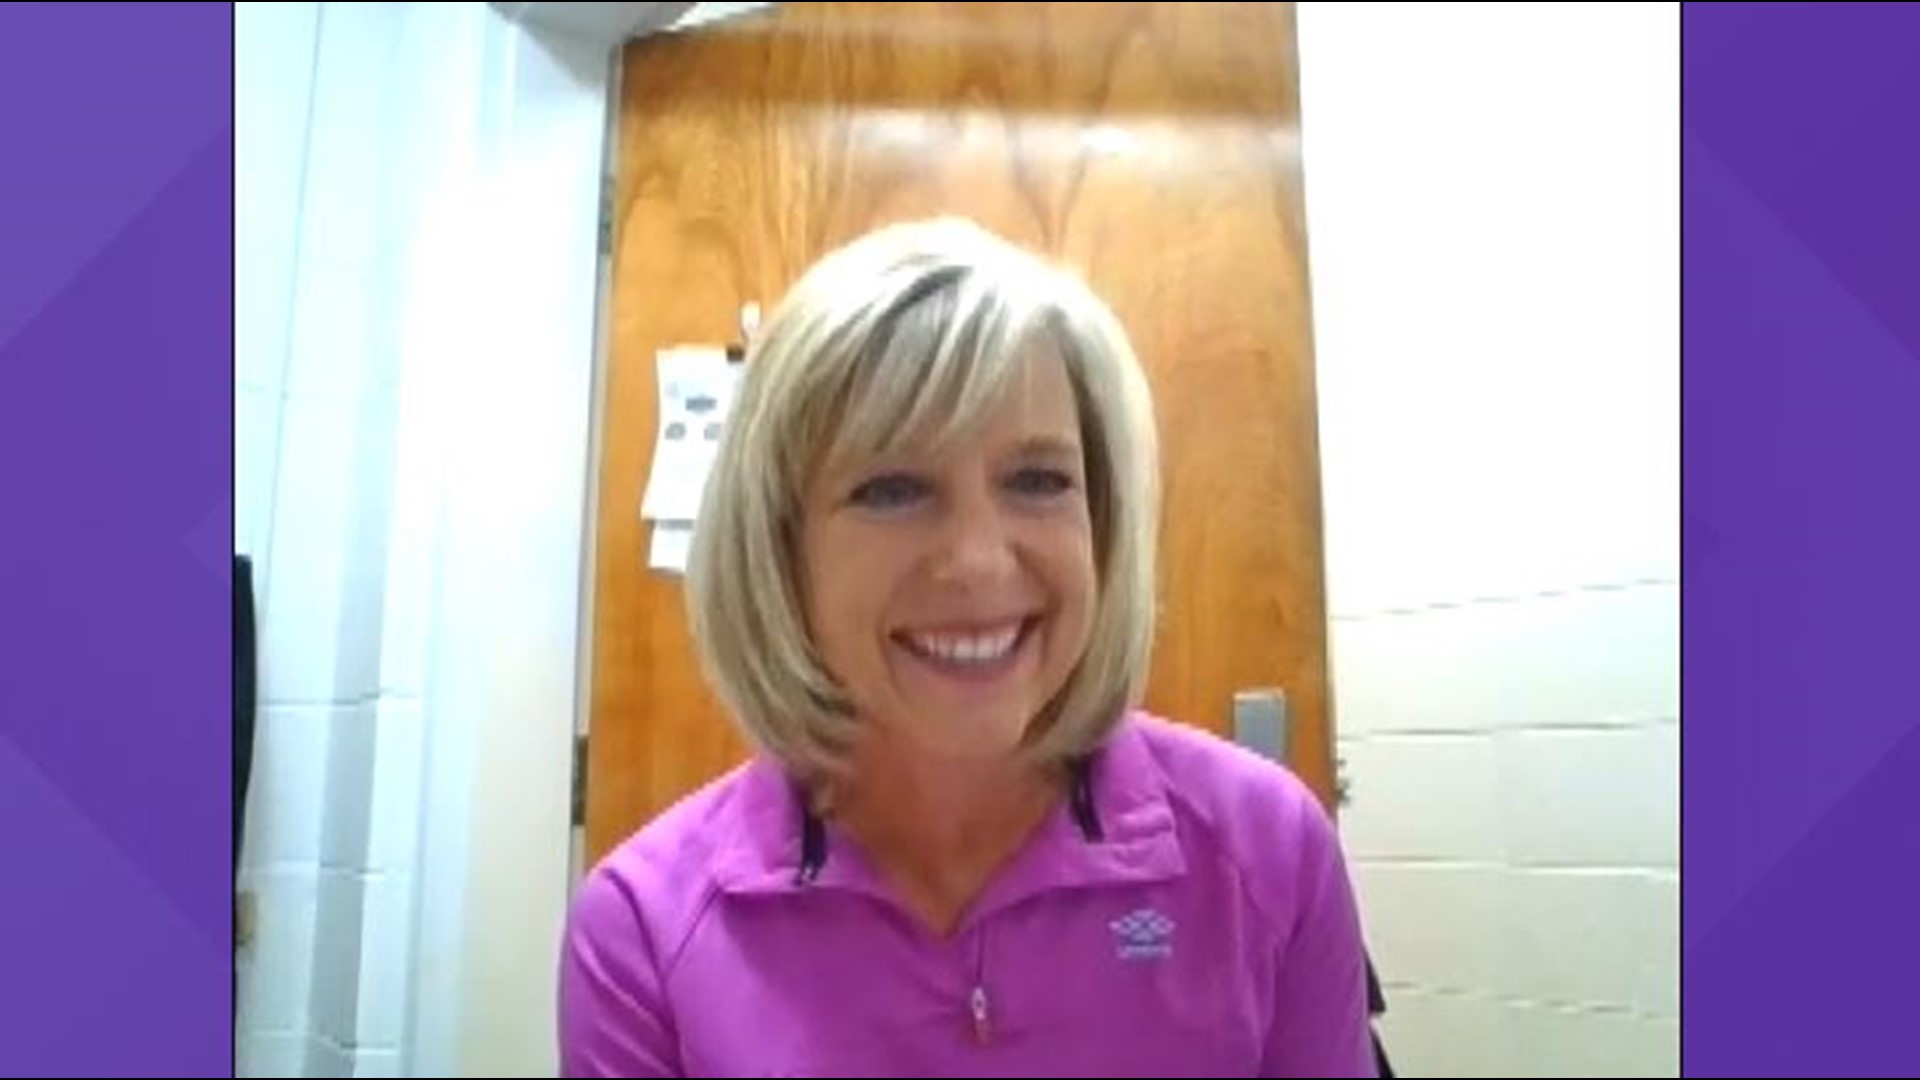 Lori Gavin, PE teacher from Parkwood Elementary School, works to involve all students in sports.